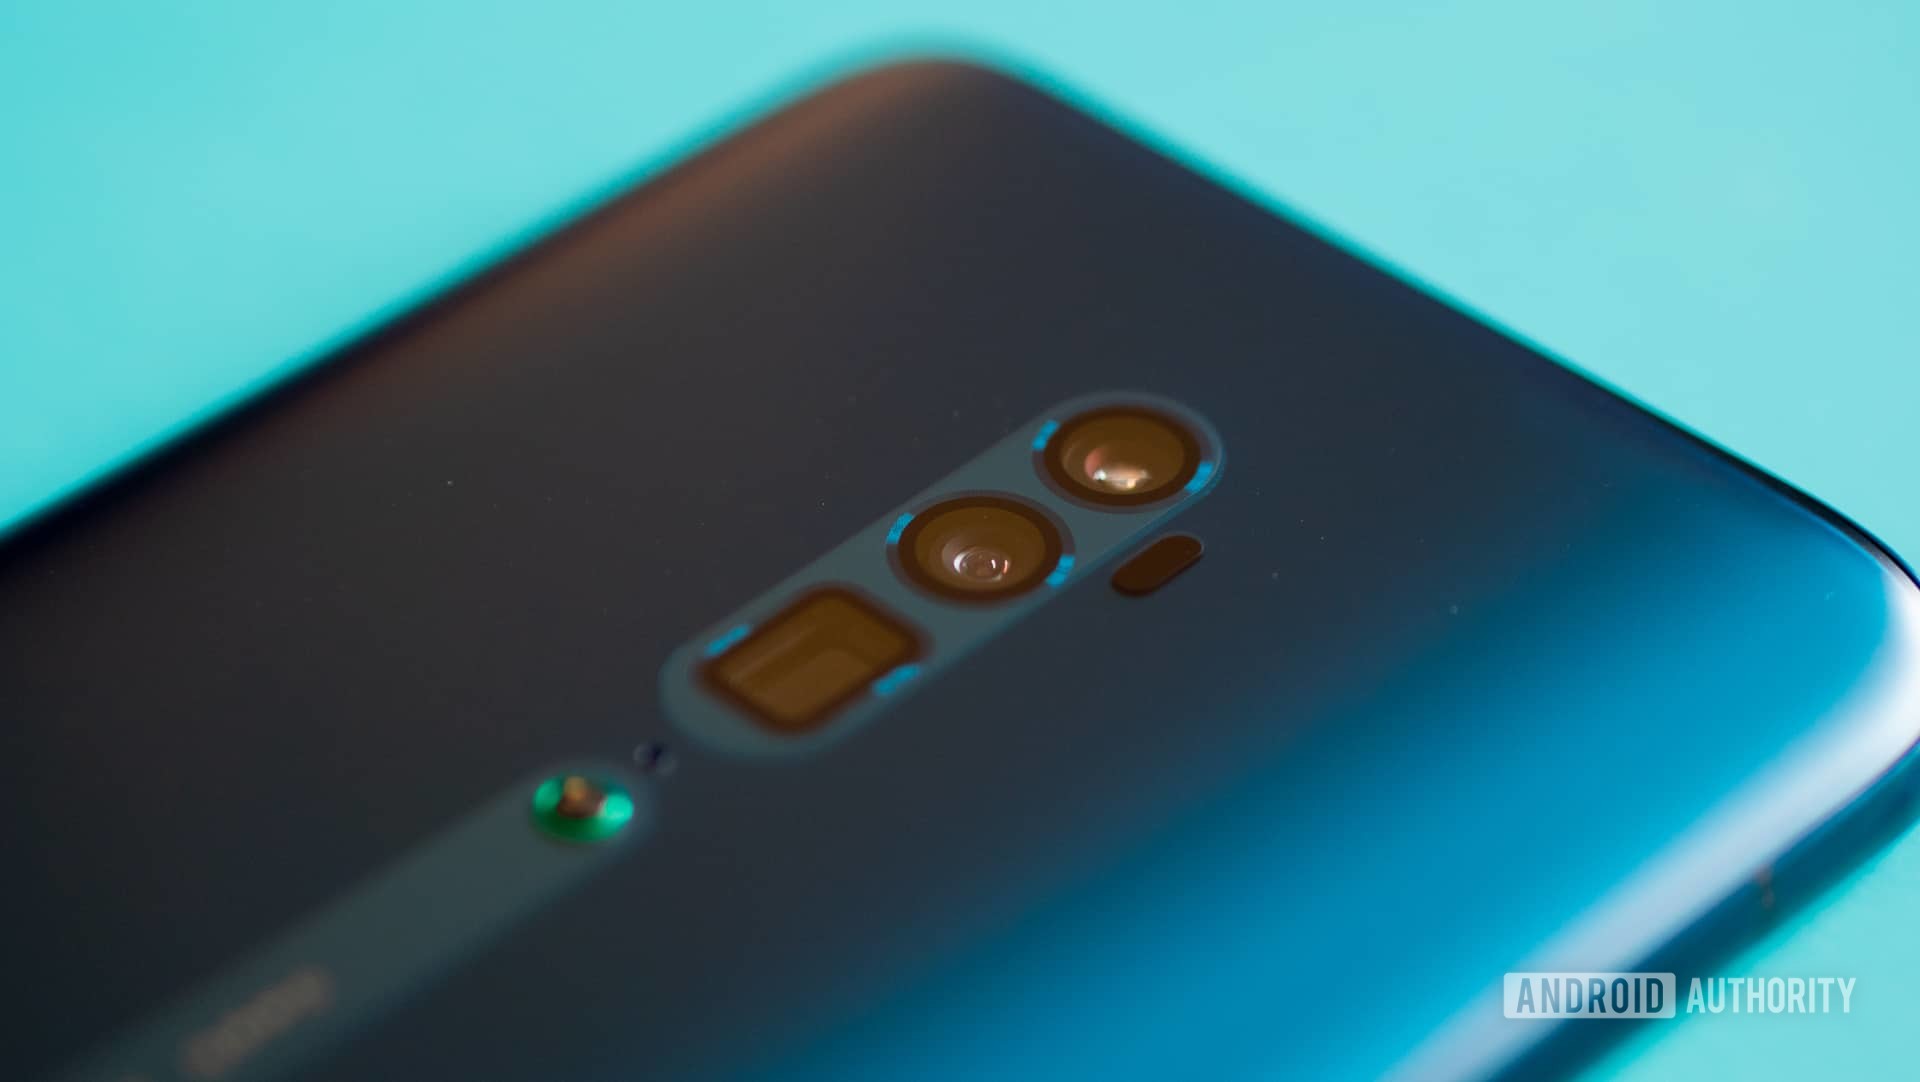 OPPO Reno 10x Zoom Edition review: A HUAWEI P30 Pro contender